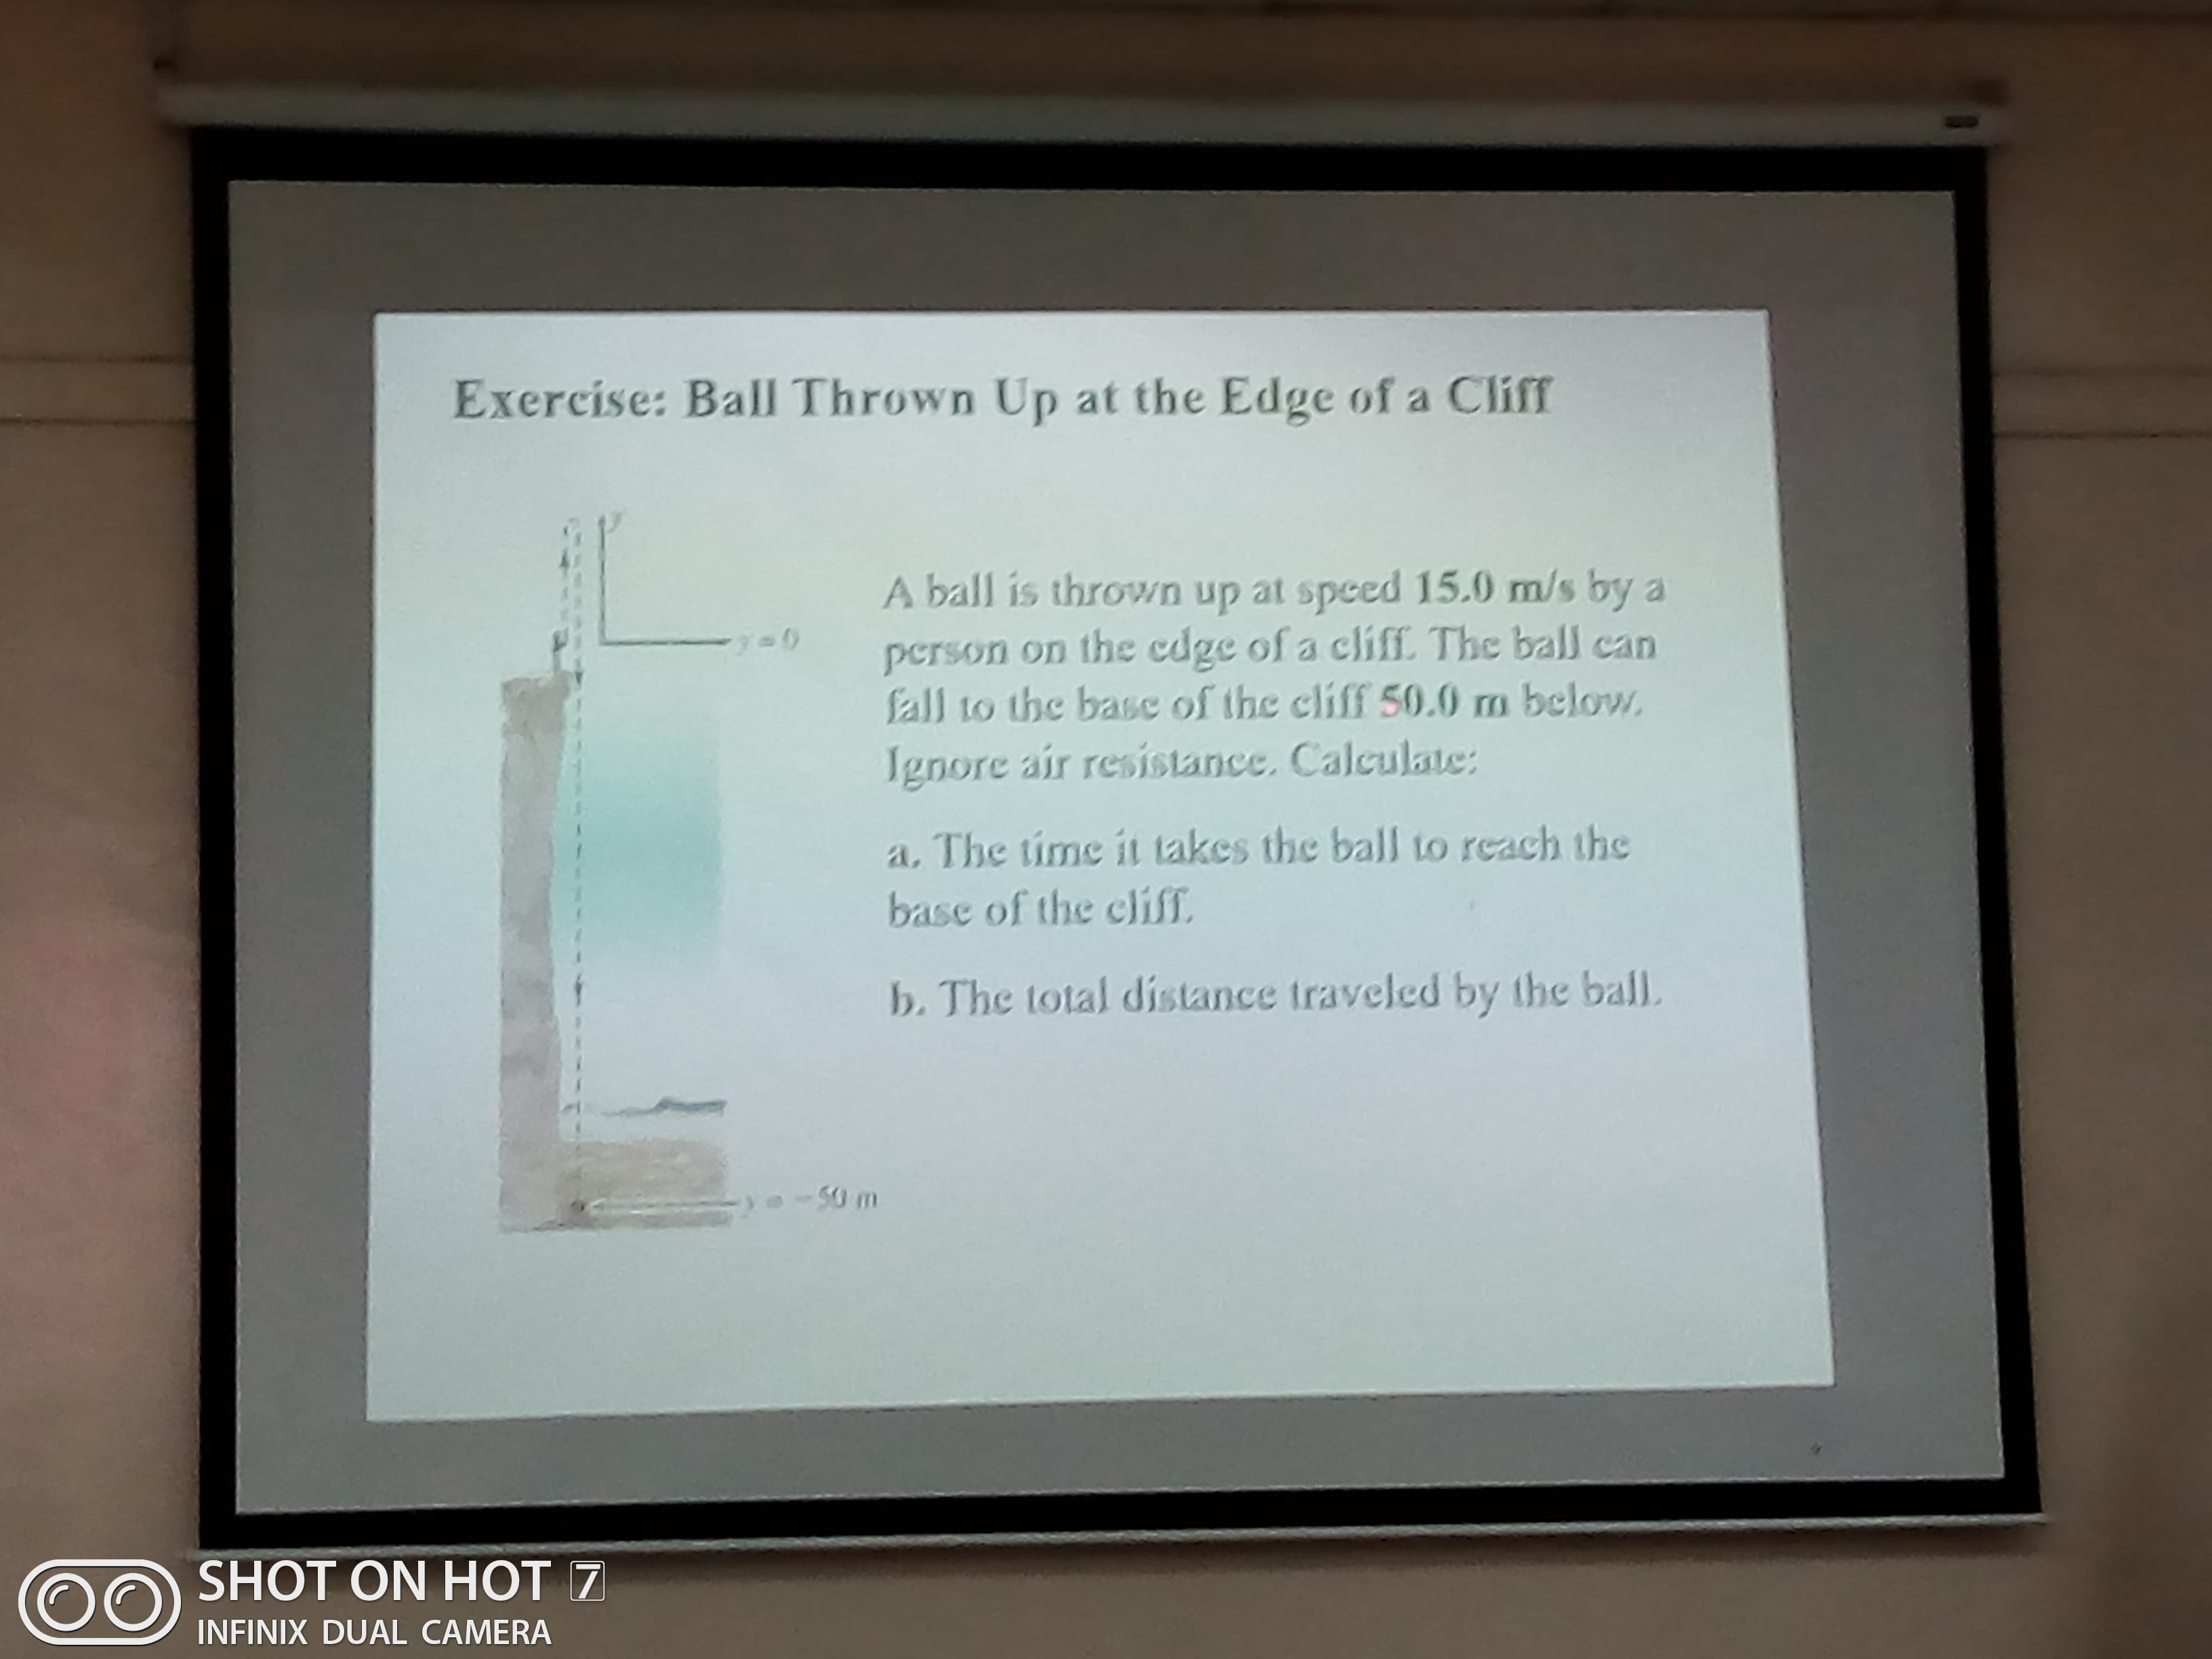 Exercise: Ball Thrown Up at the Edge of a Cliff
A ball is thrown up at speed 15.0 m/s by
person on the cdge of a cliff. The ball can
fall to the base of the cliff 50.0 m below.
Ignore air resistance. Calculate:
a. The time it takes the ball to reach the
base of the eliff
b. The total distance traveled by the ball.
50 m
SHOT ON HOT 7
INFINIX DUAL CAMERA
